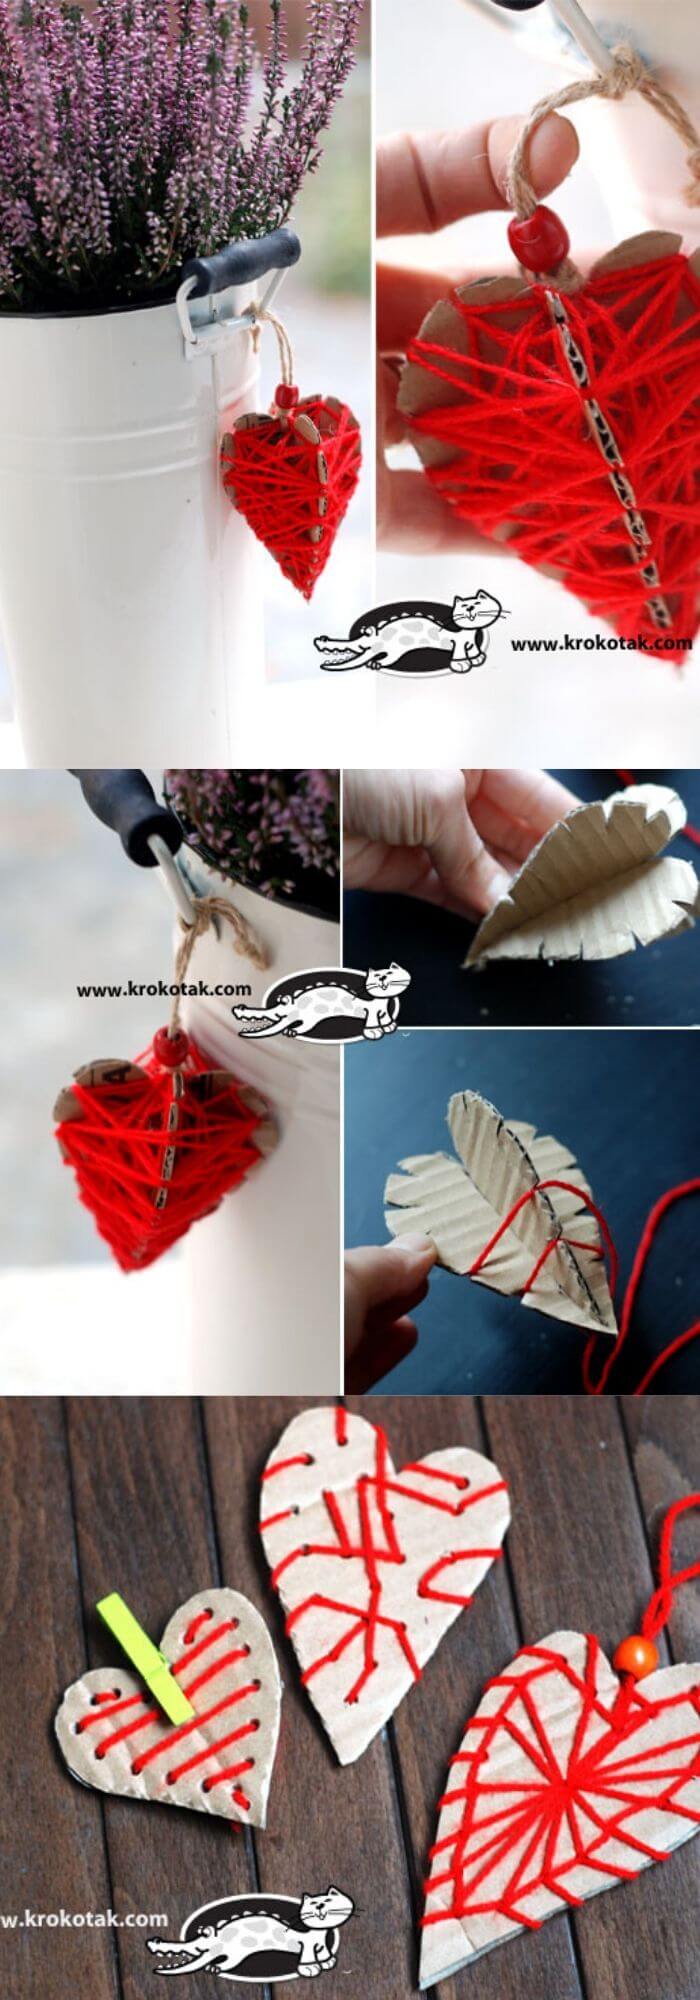 Heart from cardboards | Heart-Shaped Crafts For Valentine's Day